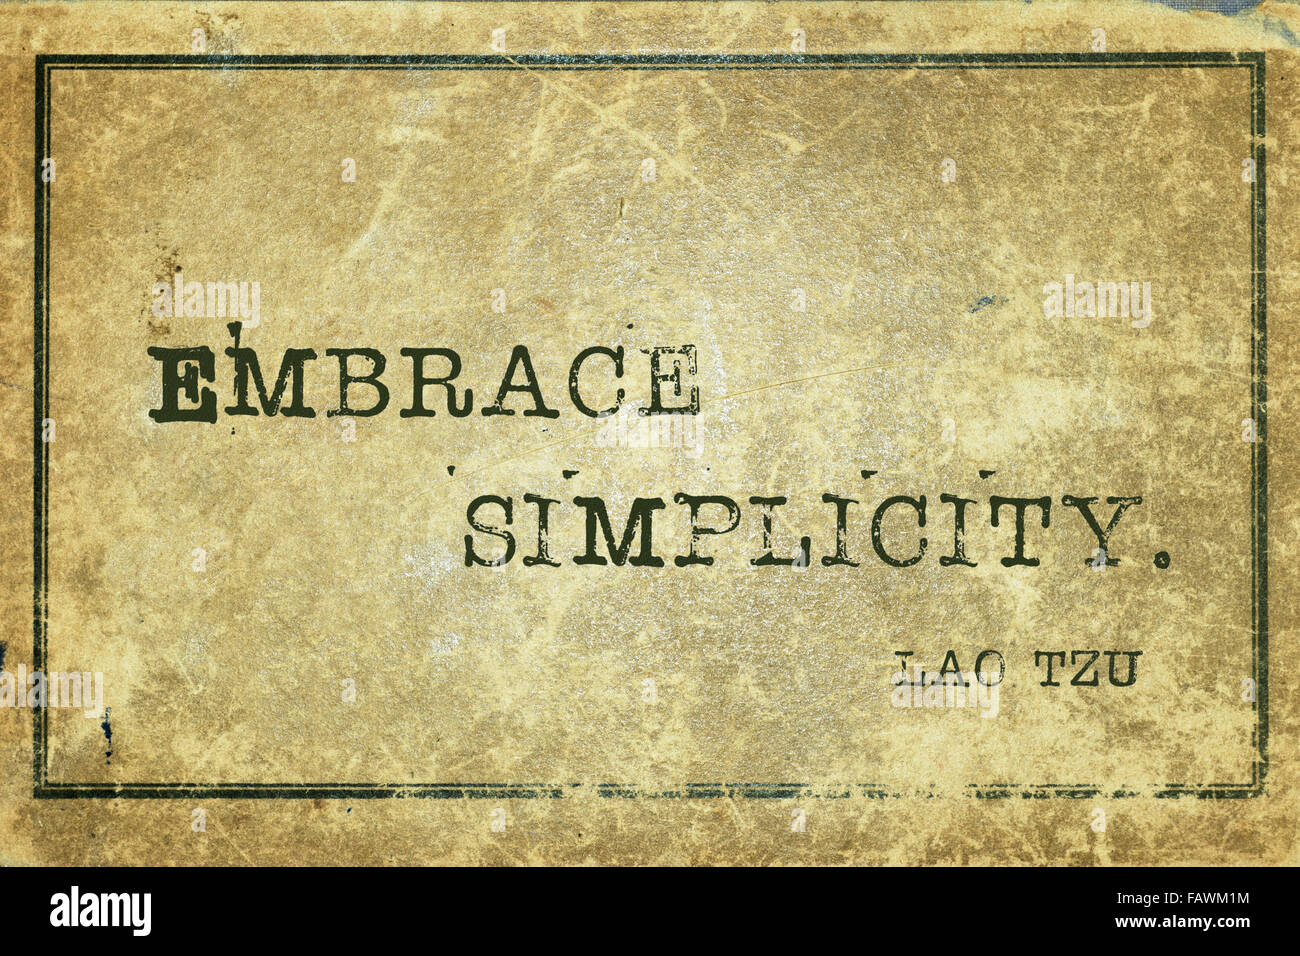 Embrace simplicity - ancient Chinese philosopher Lao Tzu quote printed on grunge vintage cardboard Stock Photo